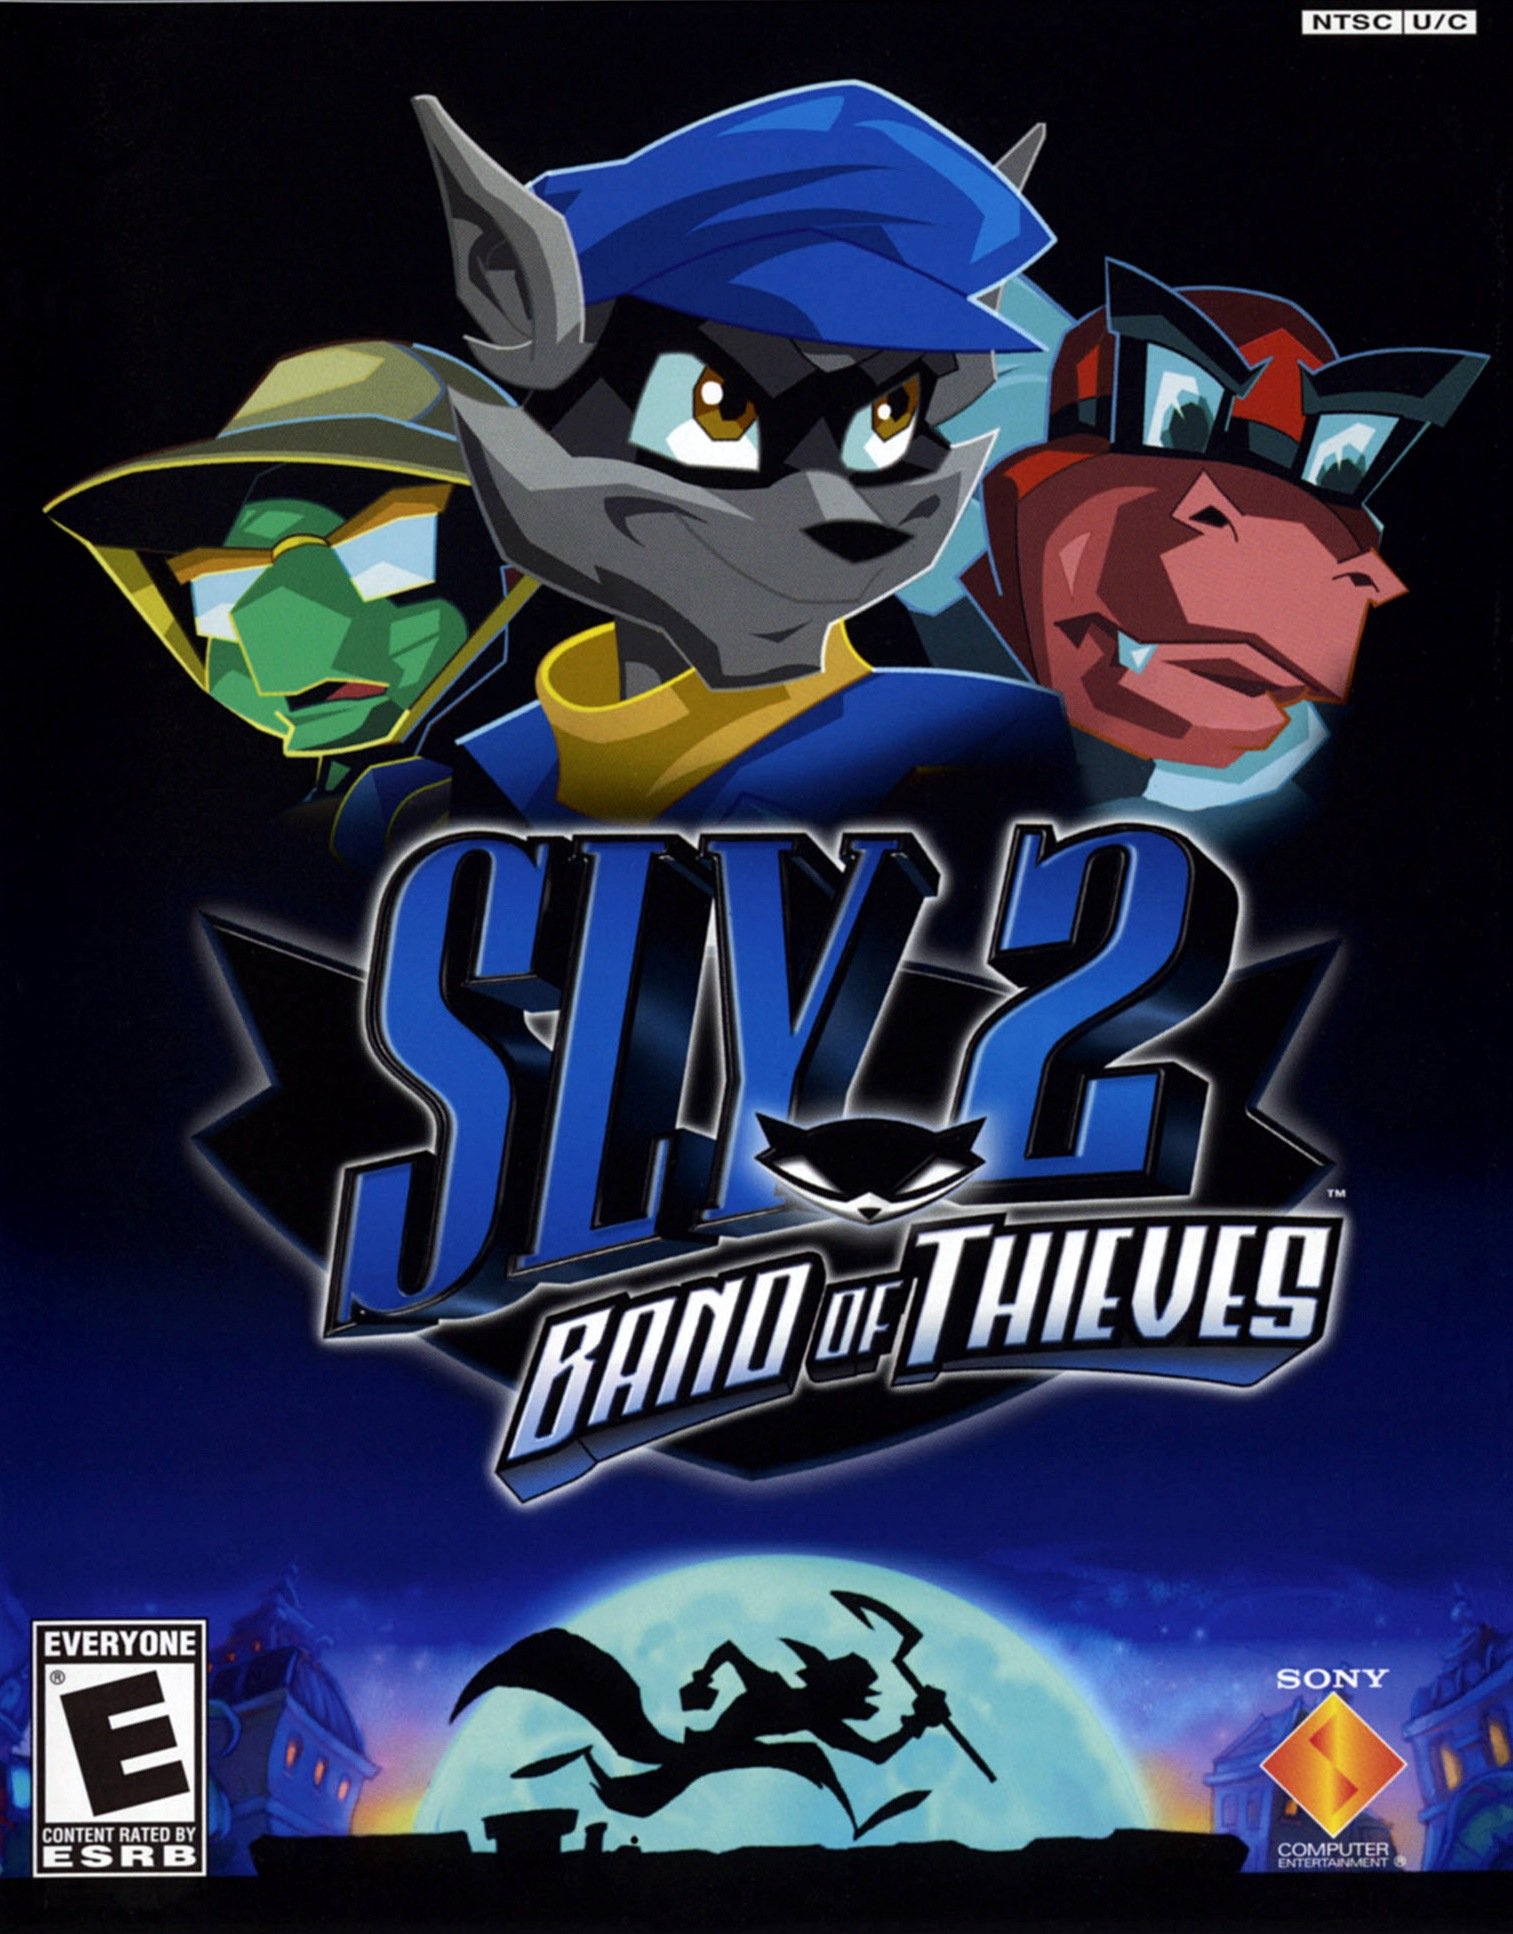 Image of Sly 2: Band of Thieves